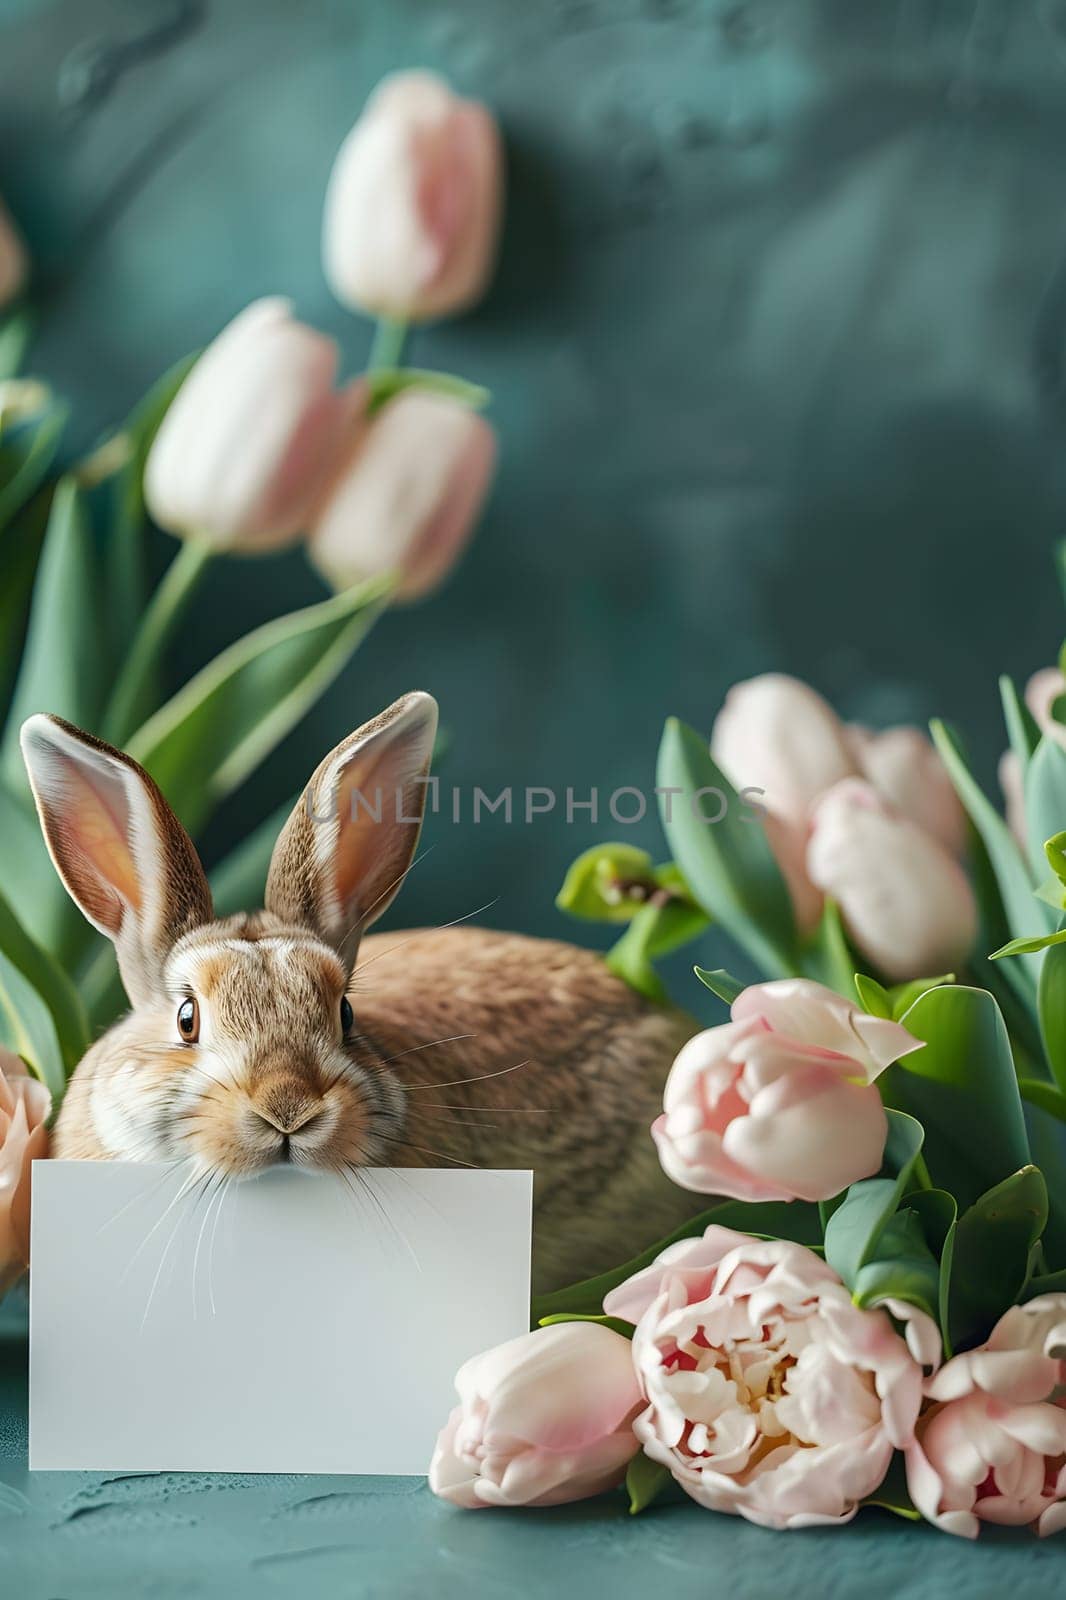 A rabbit is holding a white card in front of colorful flowers, creating a picturesque scene of nature and art blending together in a whimsical event